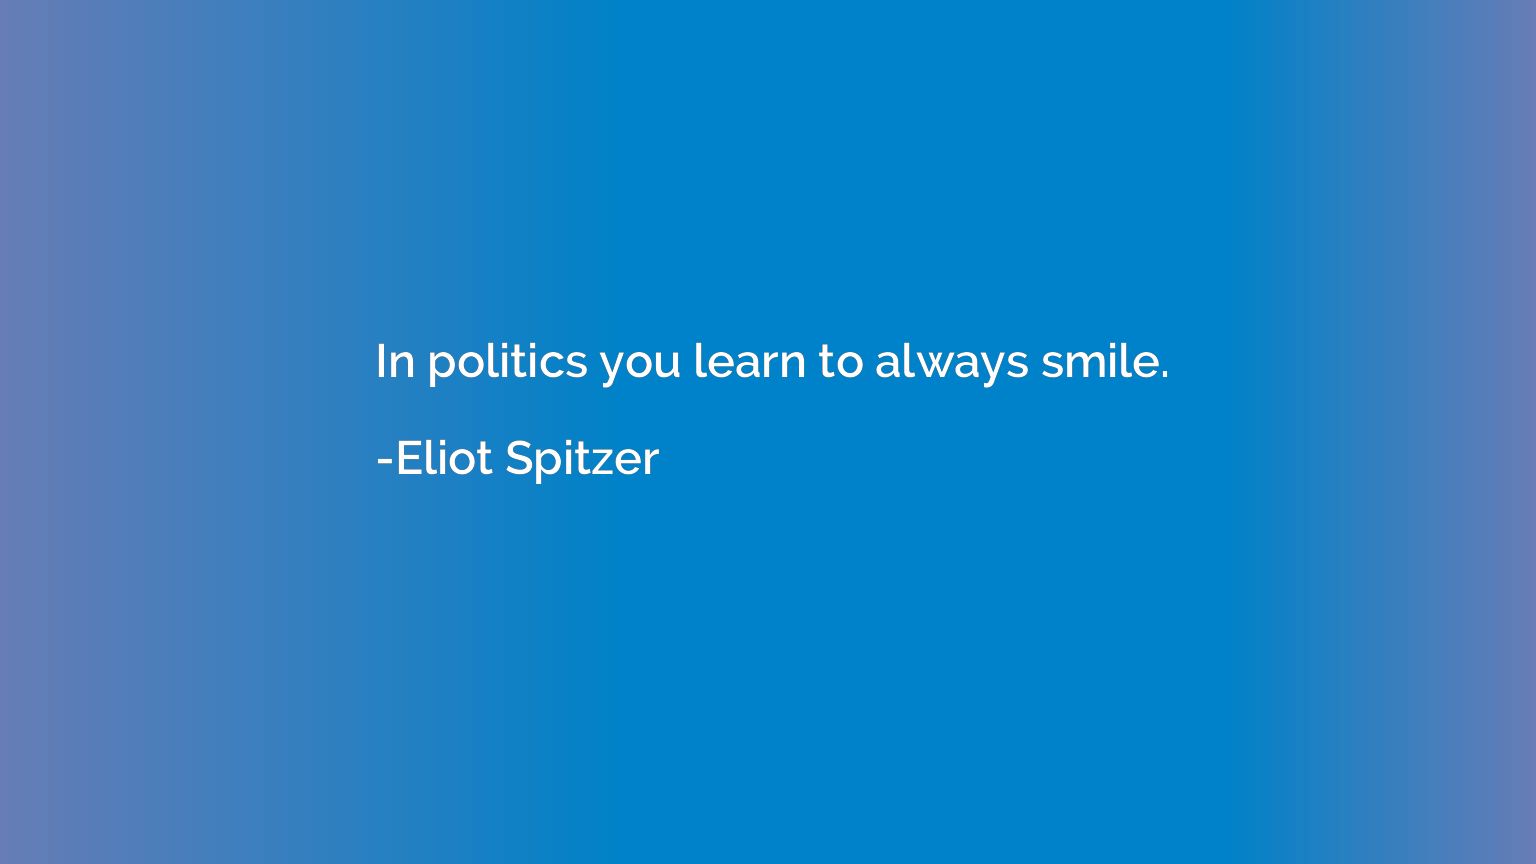 In politics you learn to always smile.